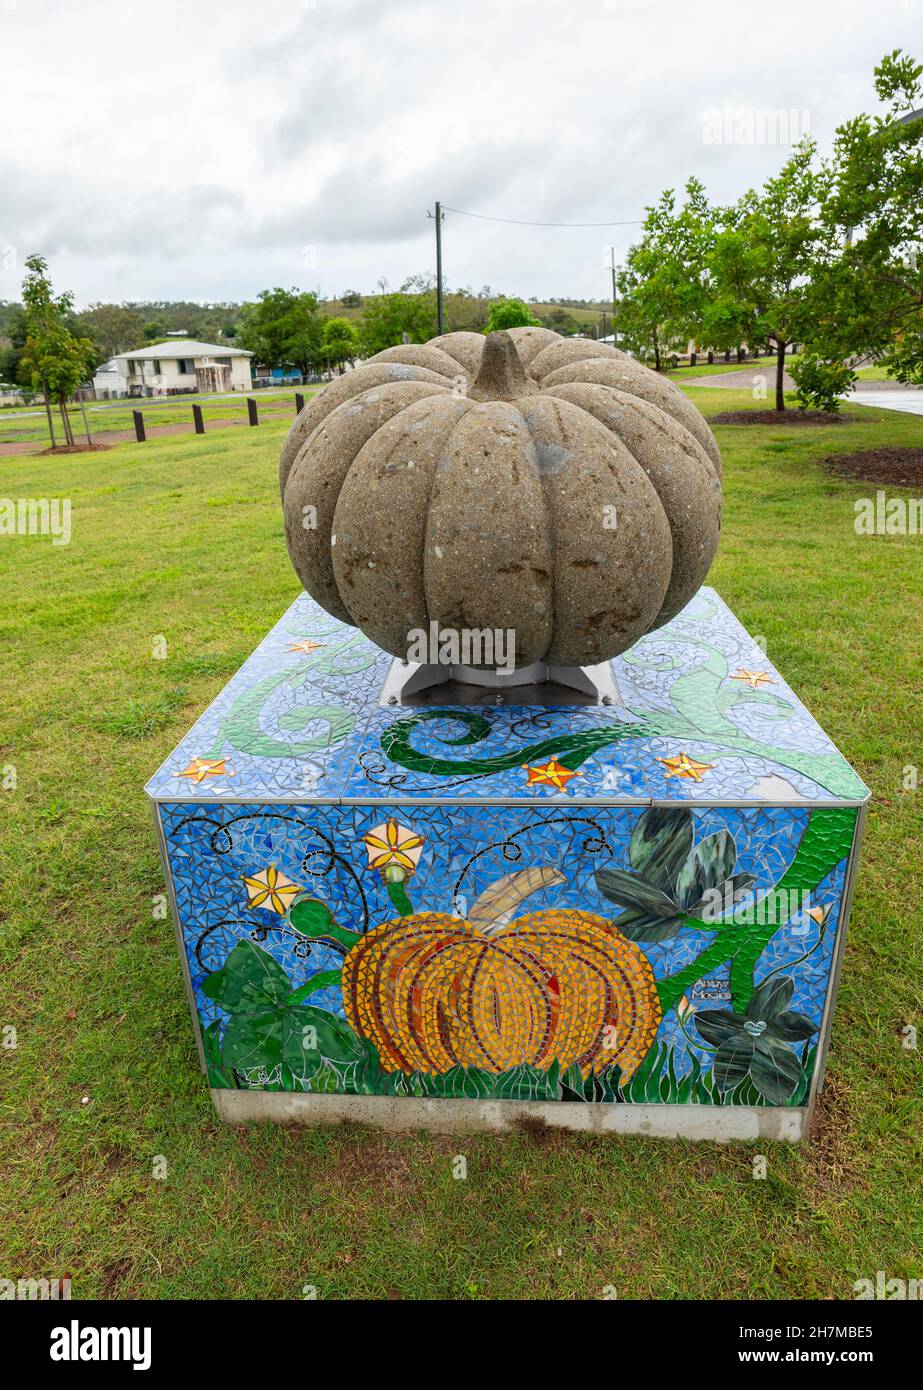 The Pumpkin festival was launched in 1997 to revitalise the town following prolonged drought and water shortages, this 'big pumpkin' created then. Stock Photo